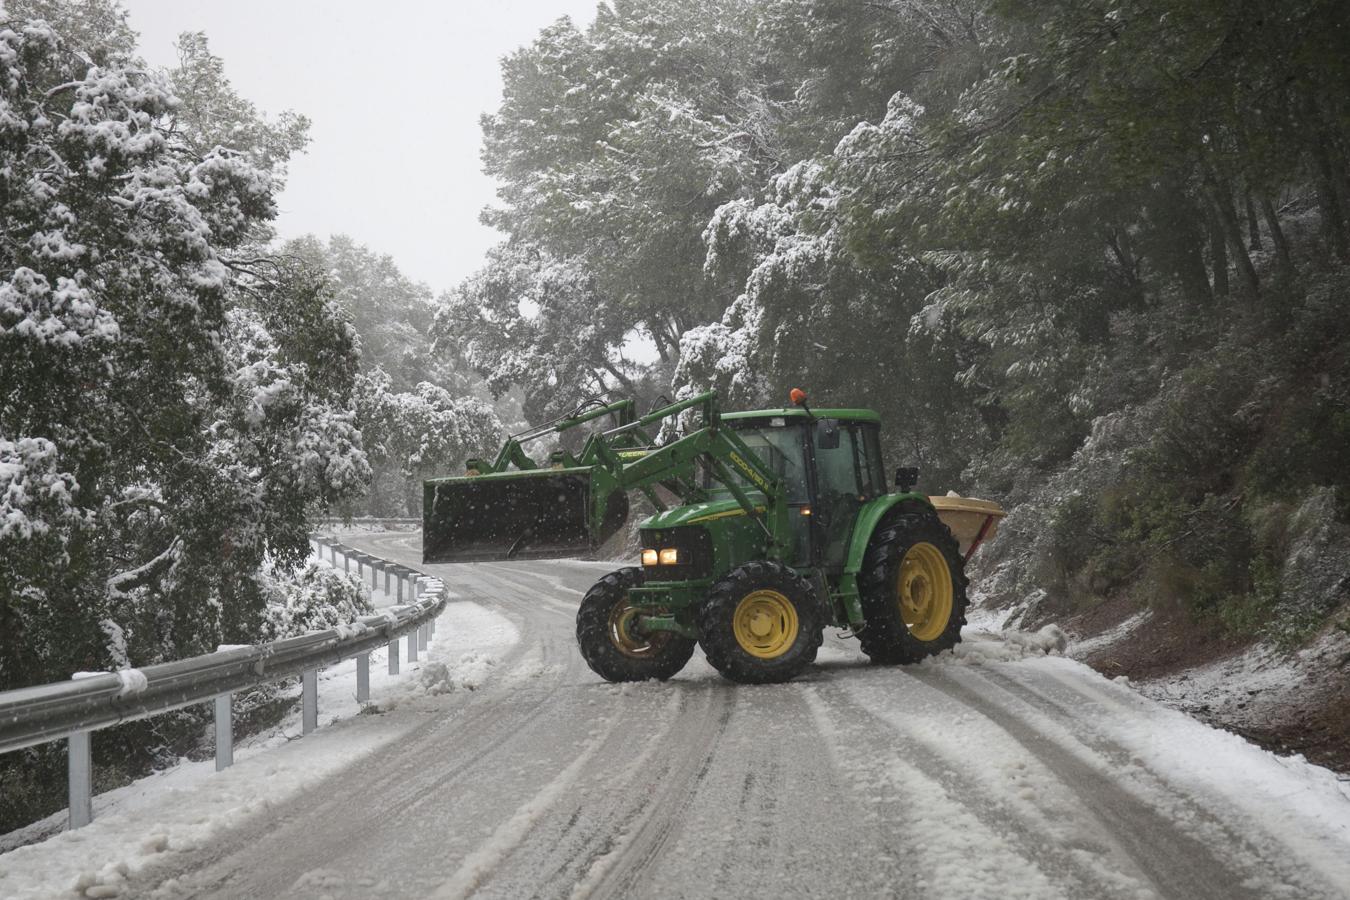 Travel chaos on Monday after several inches of snow fall on Malaga province (gallery)